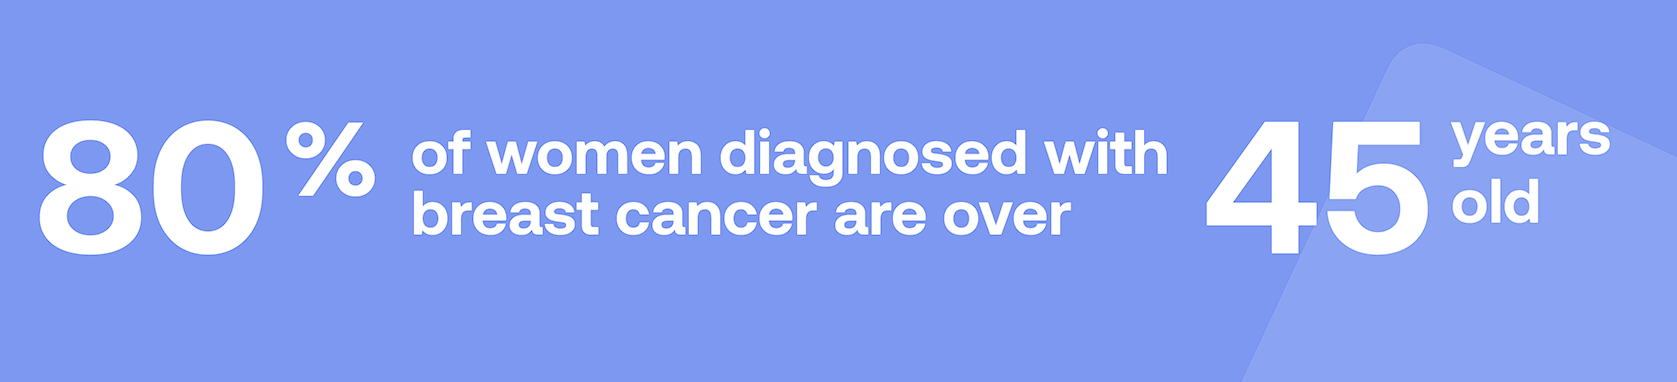 80% of women diagnosed with breast cancer are over 45 years old